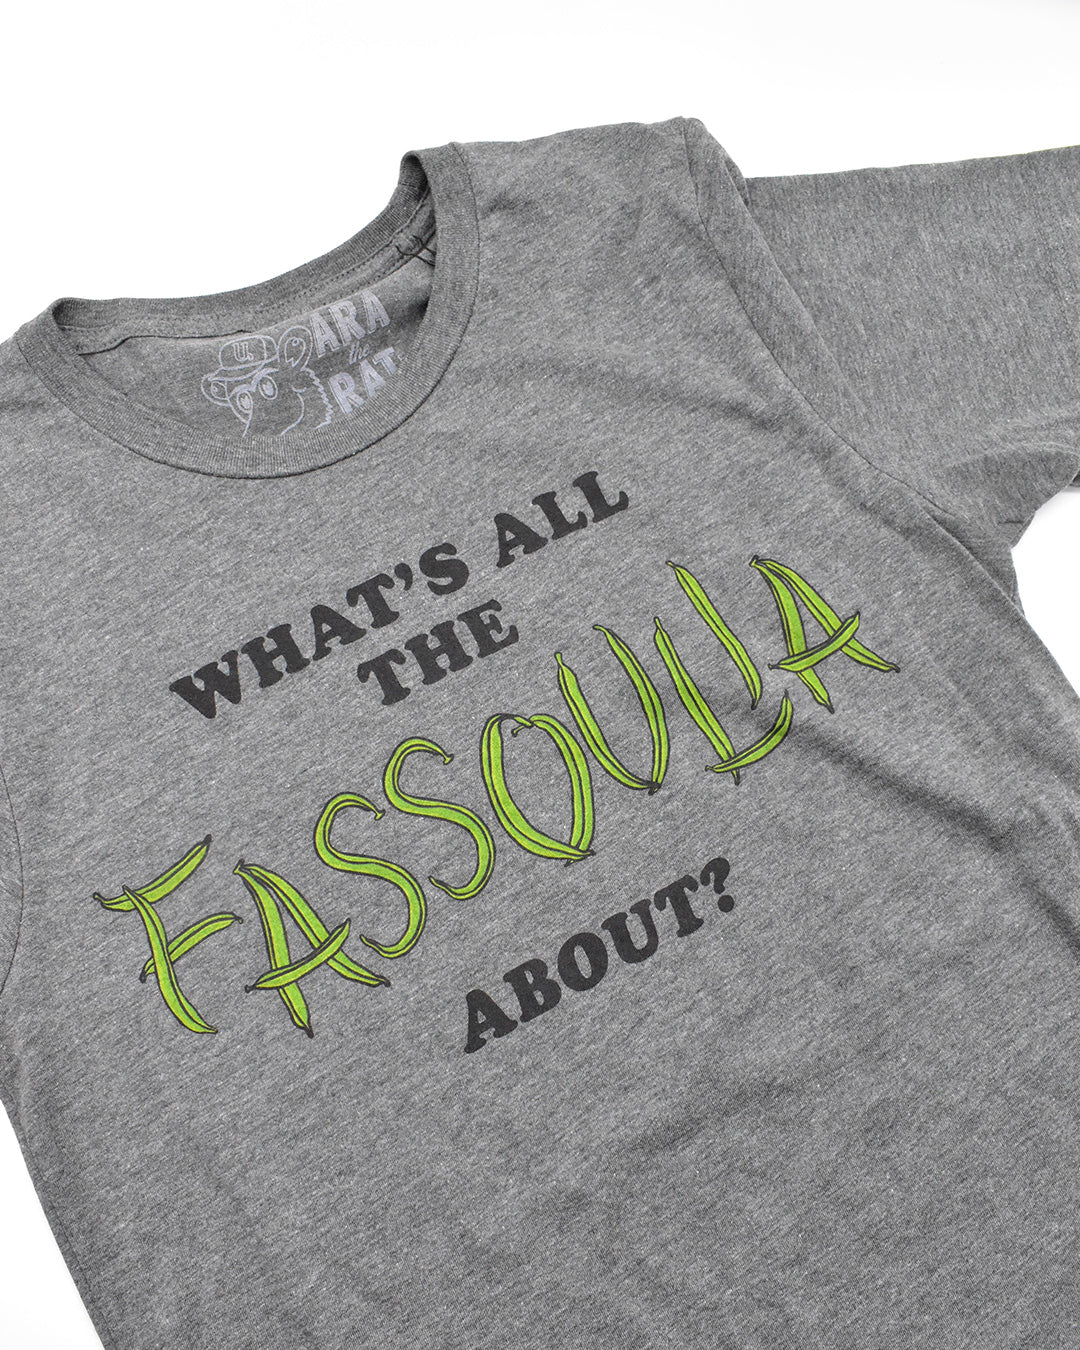 🚨ONLY ONE🚨 What's All The Fassoulia About T-shirt - SMALL